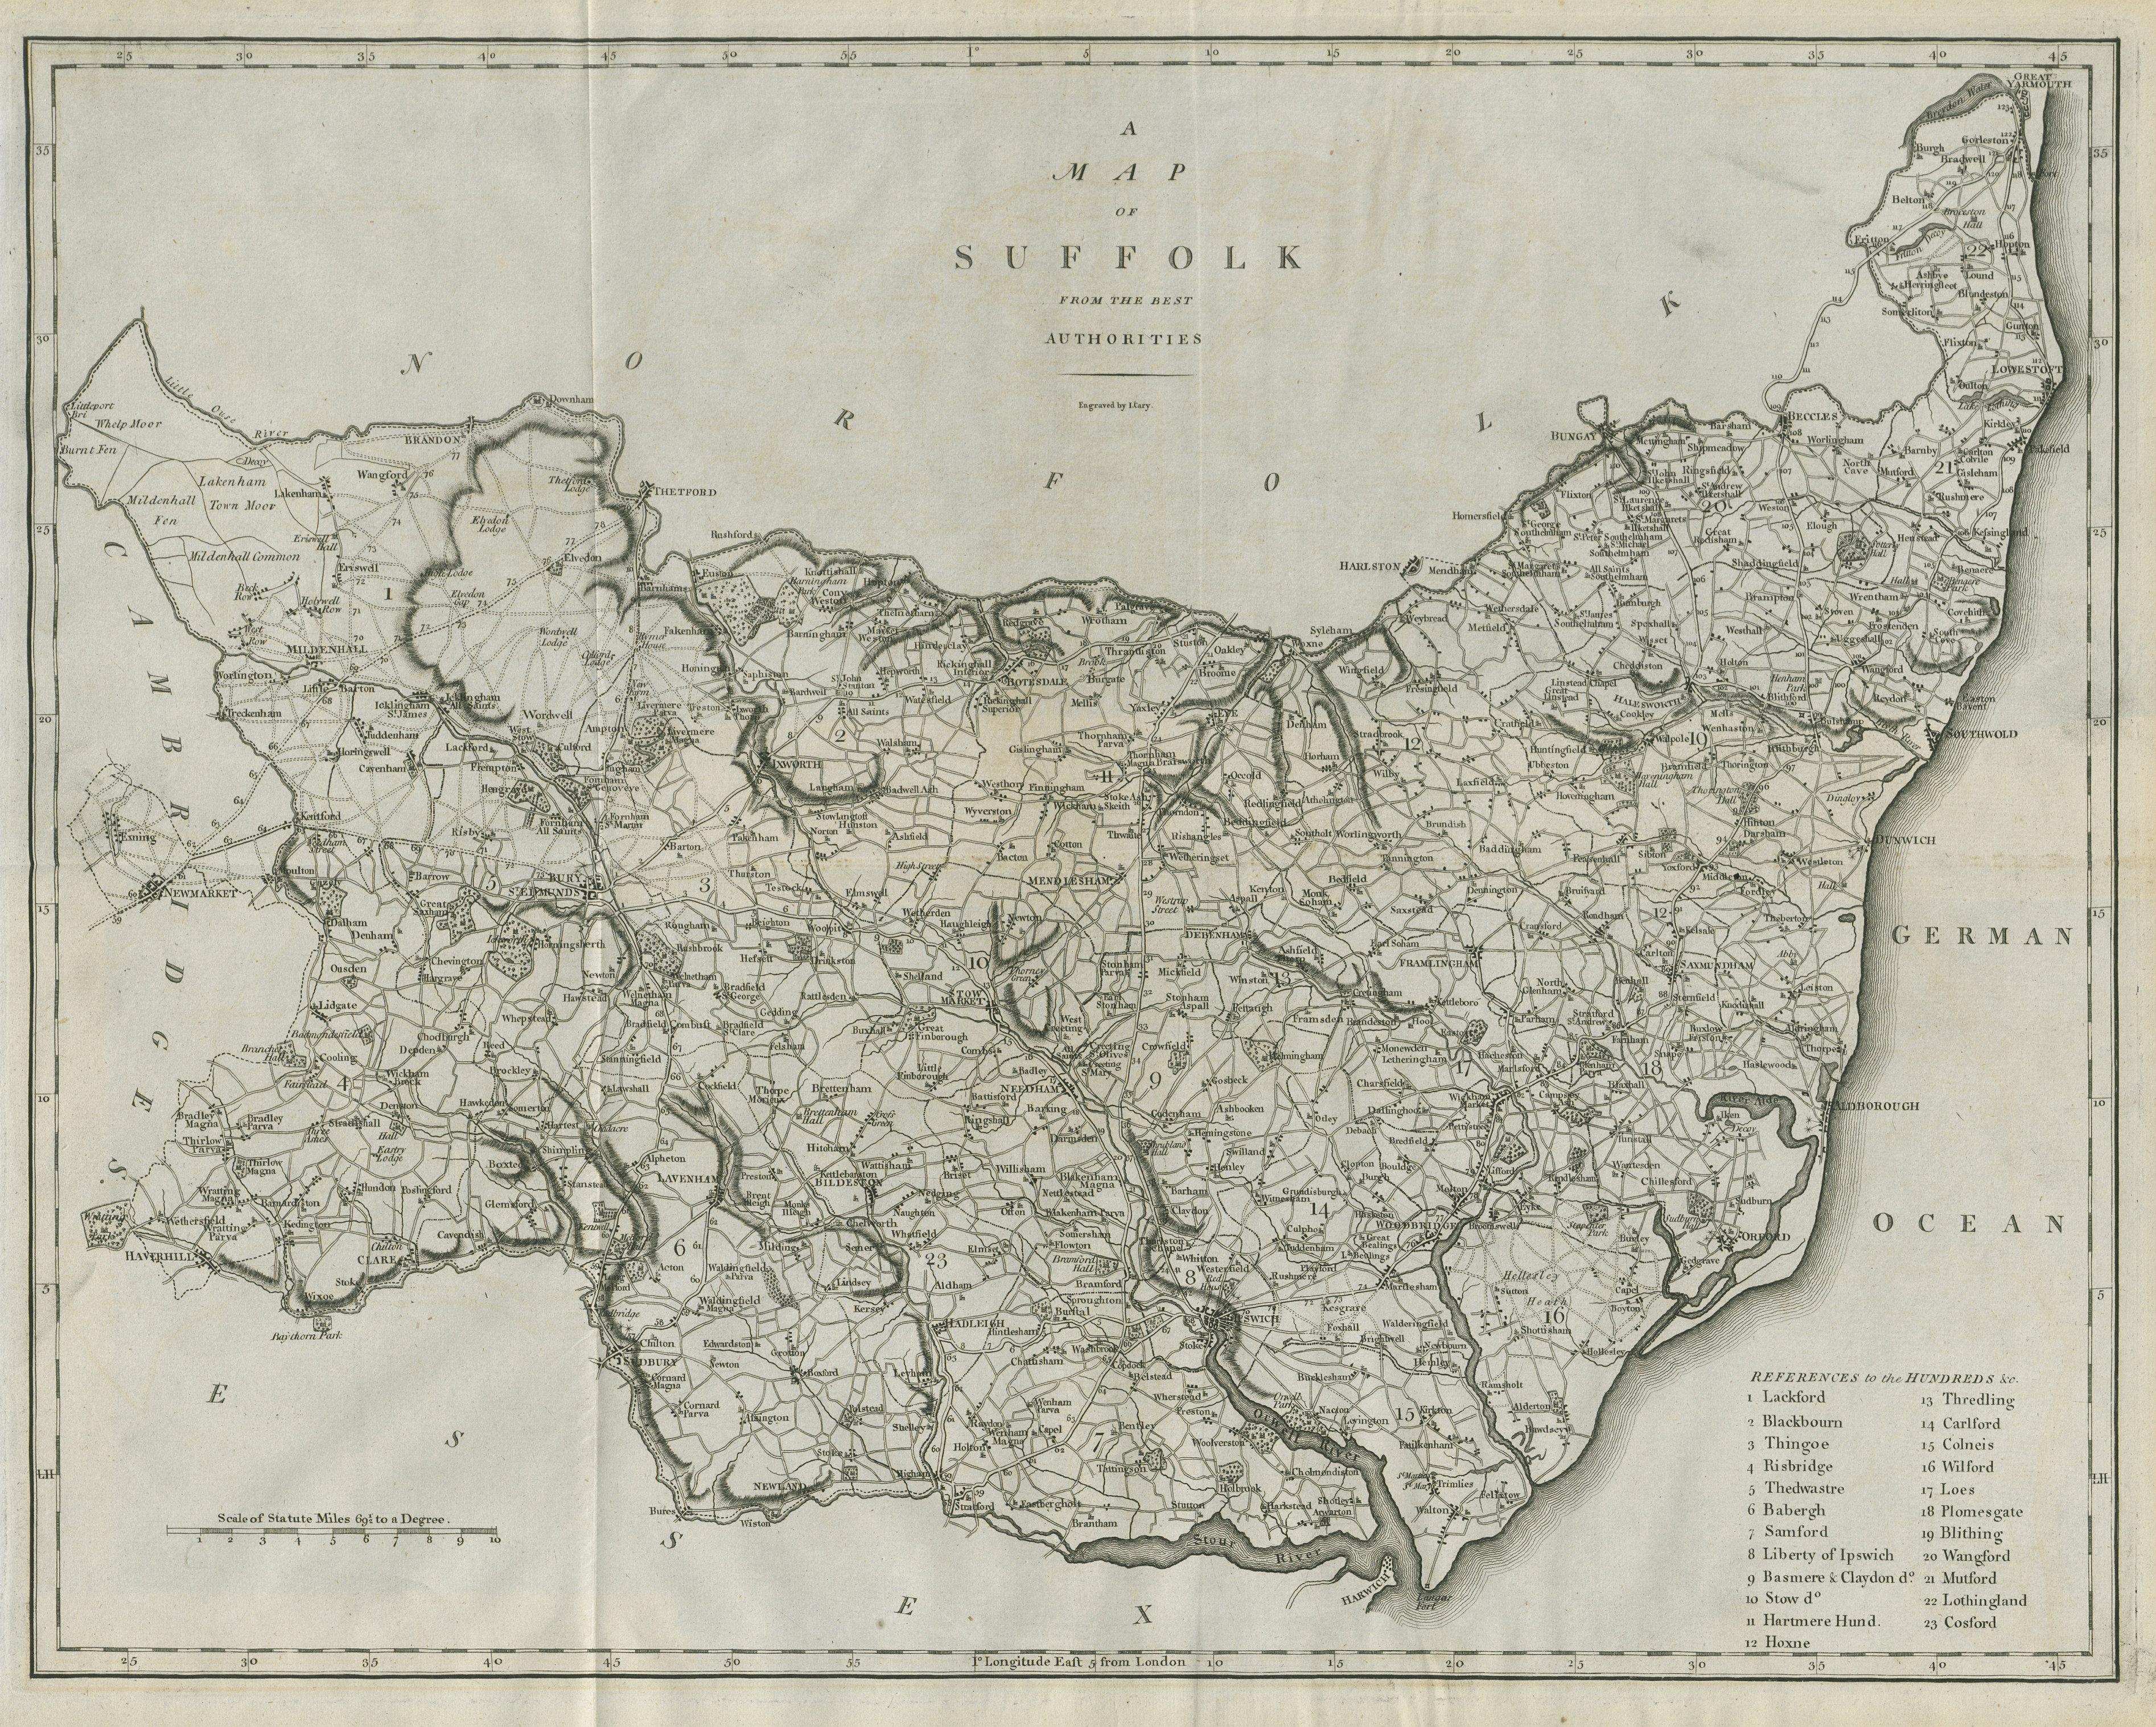 Associate Product "A map of Suffolk from the best authorities". County map. CARY 1789 old